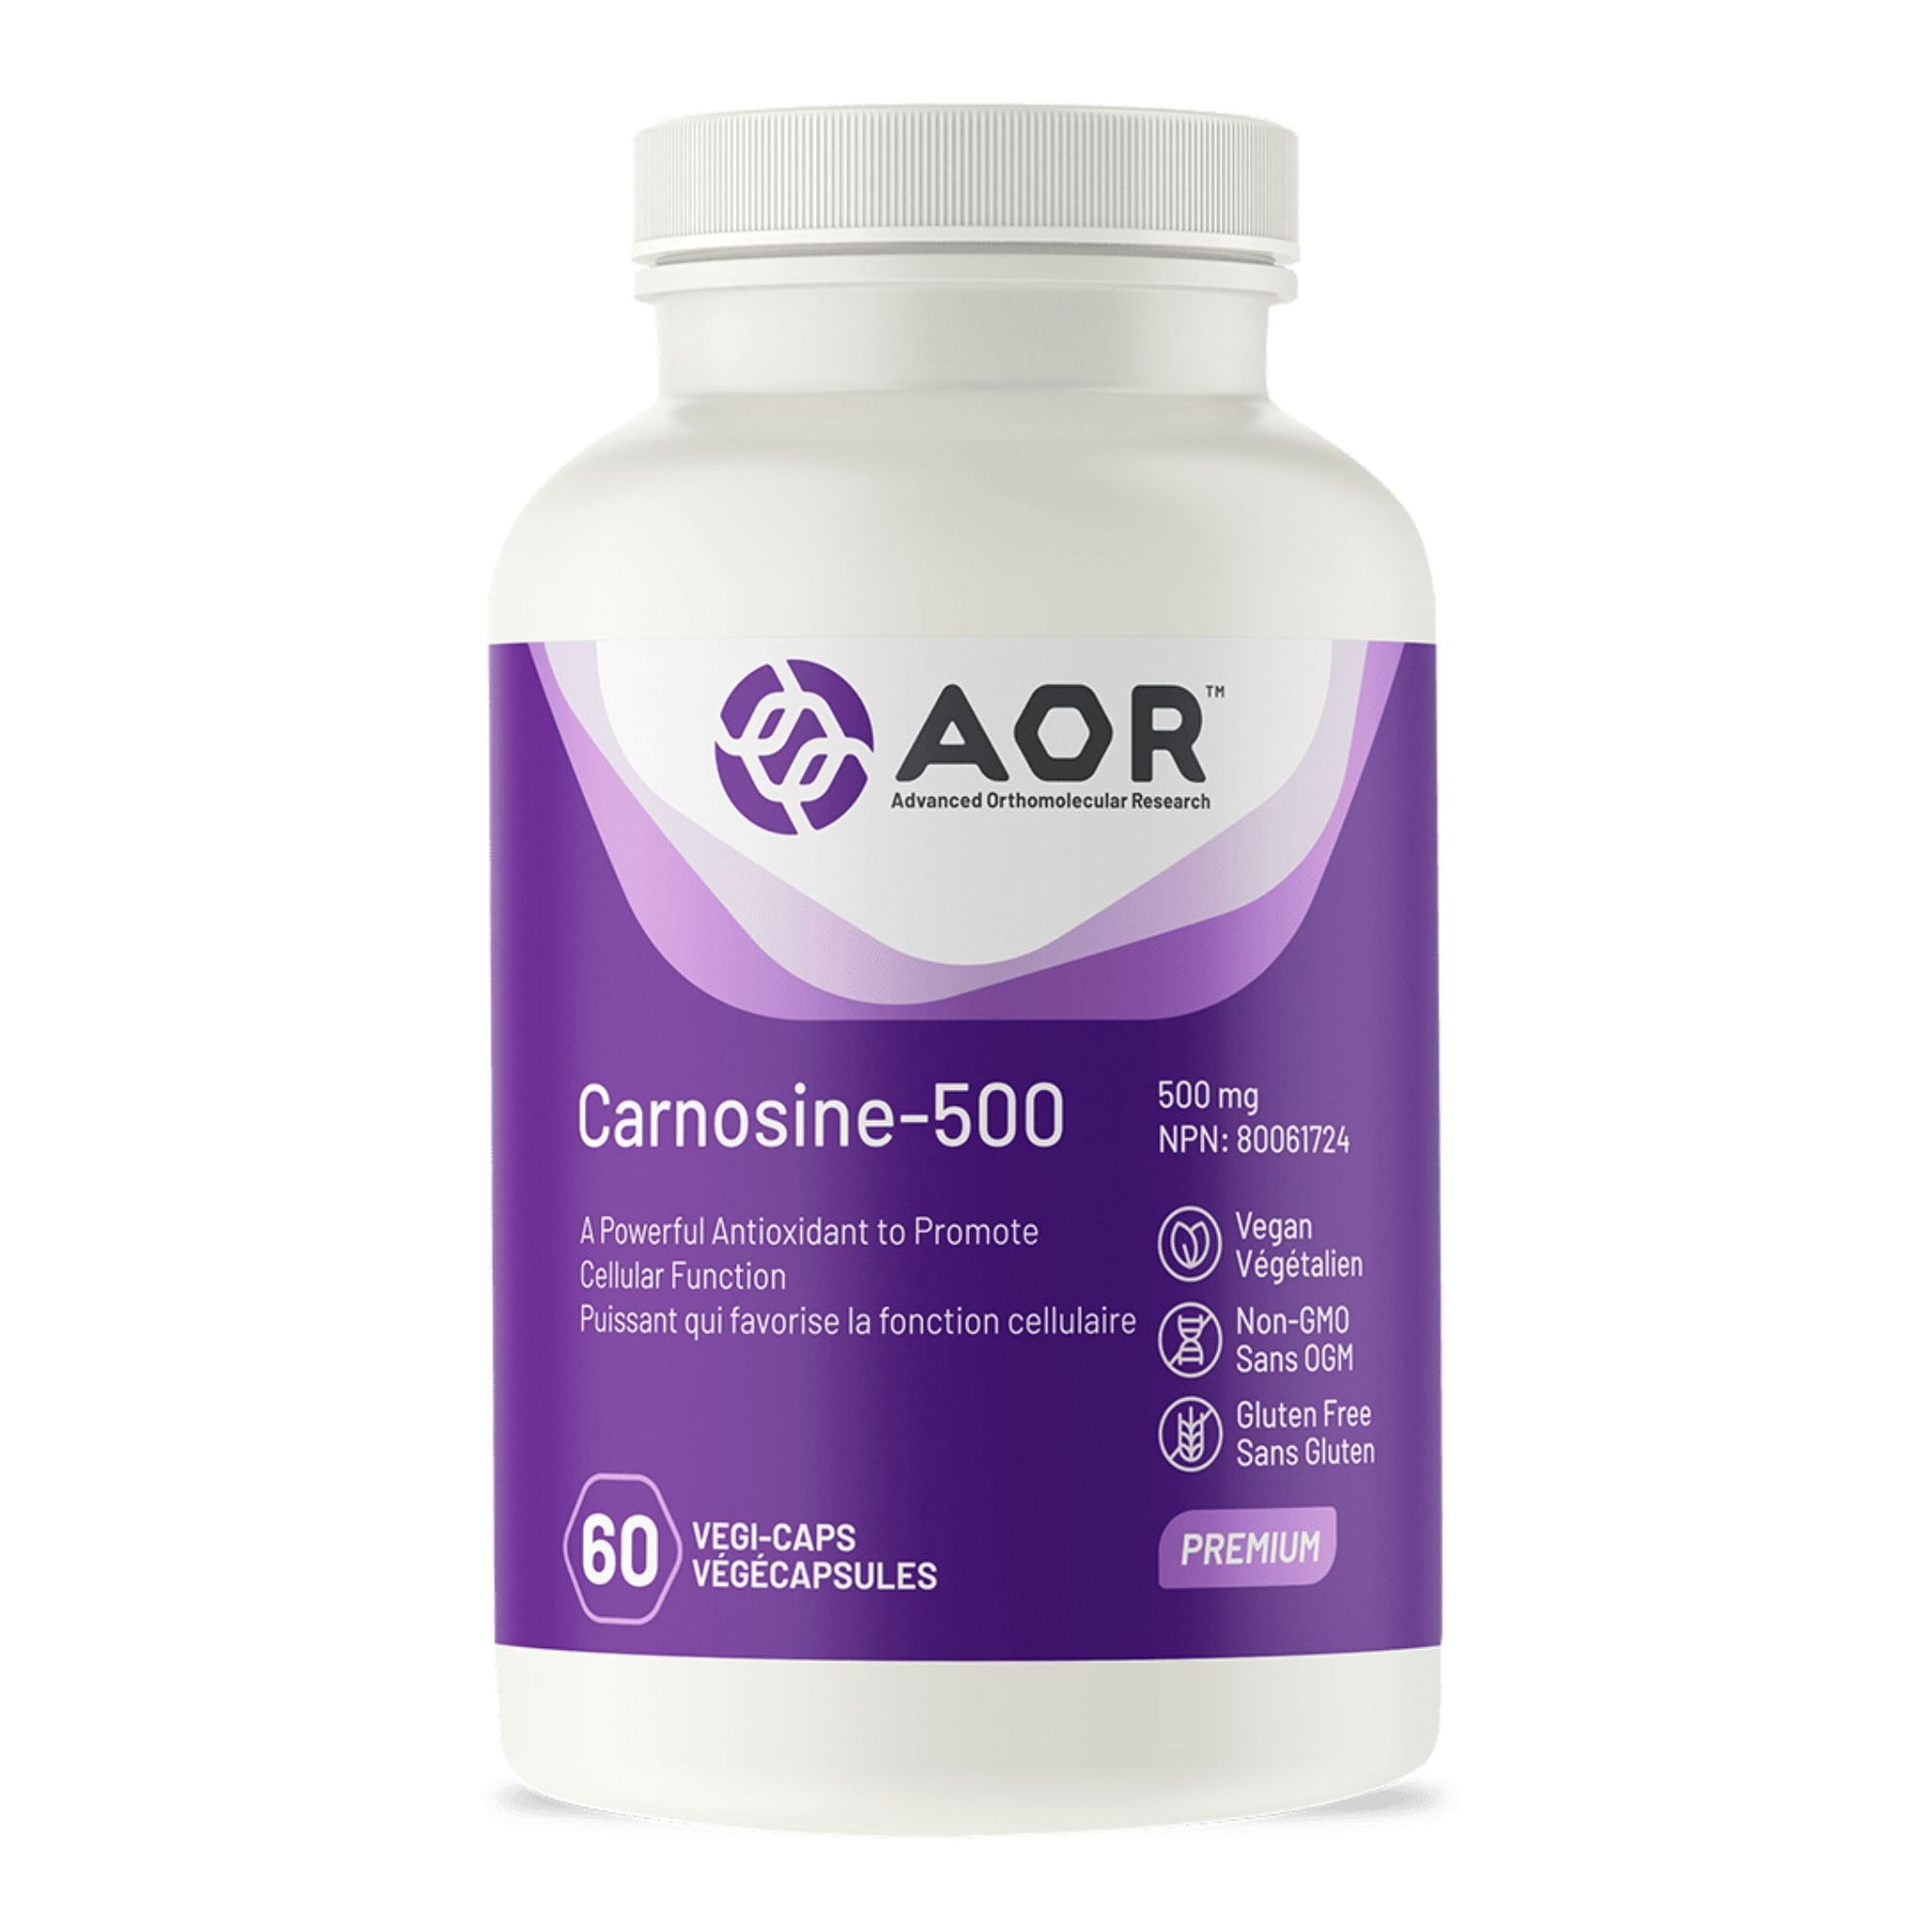 AOR Carnosine-500, 500mg 60 Vegetable Capsules - A powerful antioxidant supplement to promote cellular function.